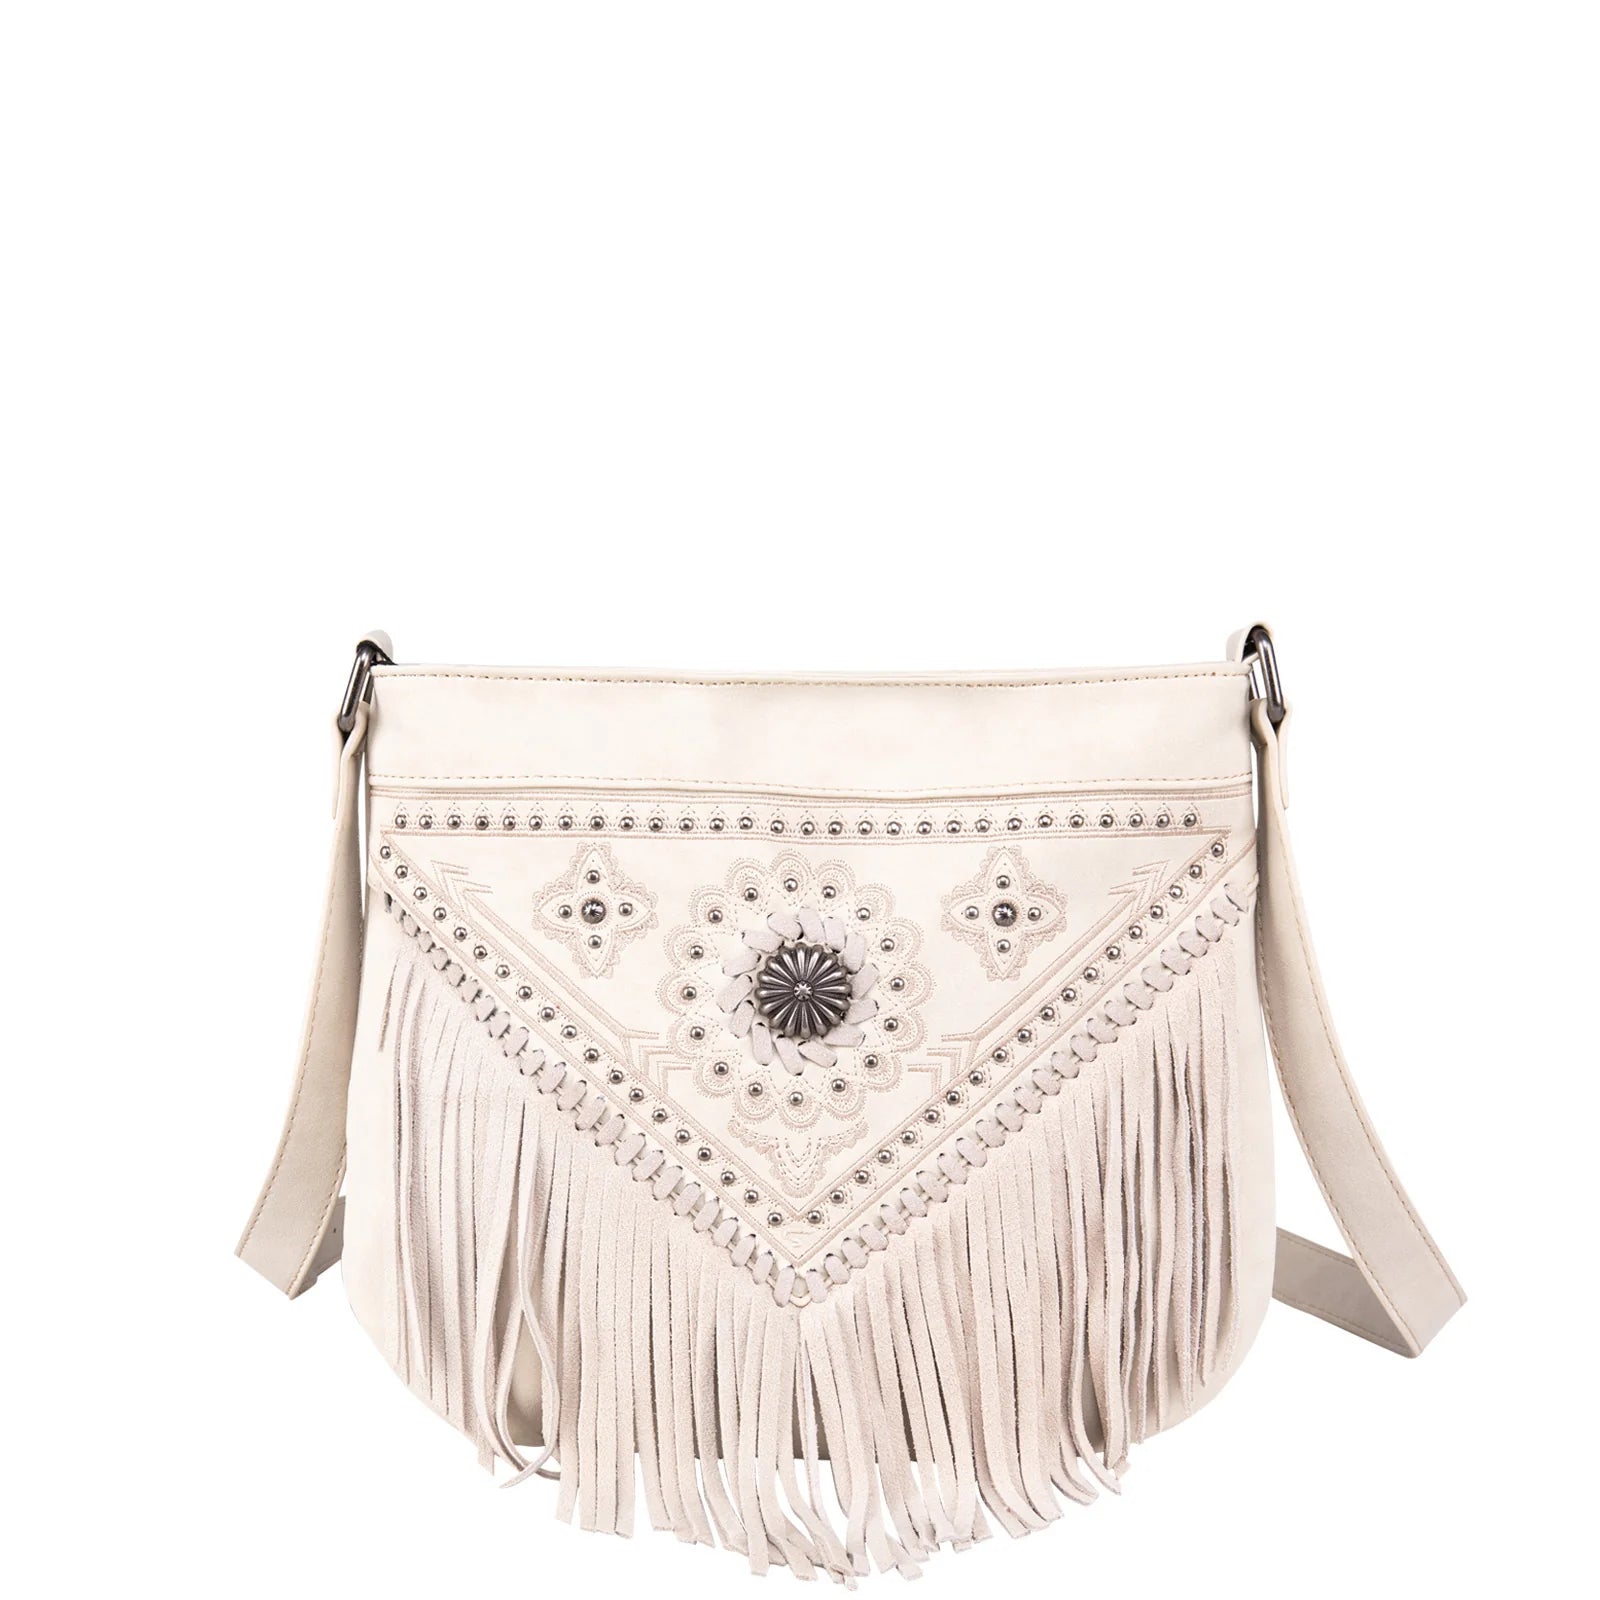 Montana West Concho Collection Concealed Carry Crossbody Bag - Beige